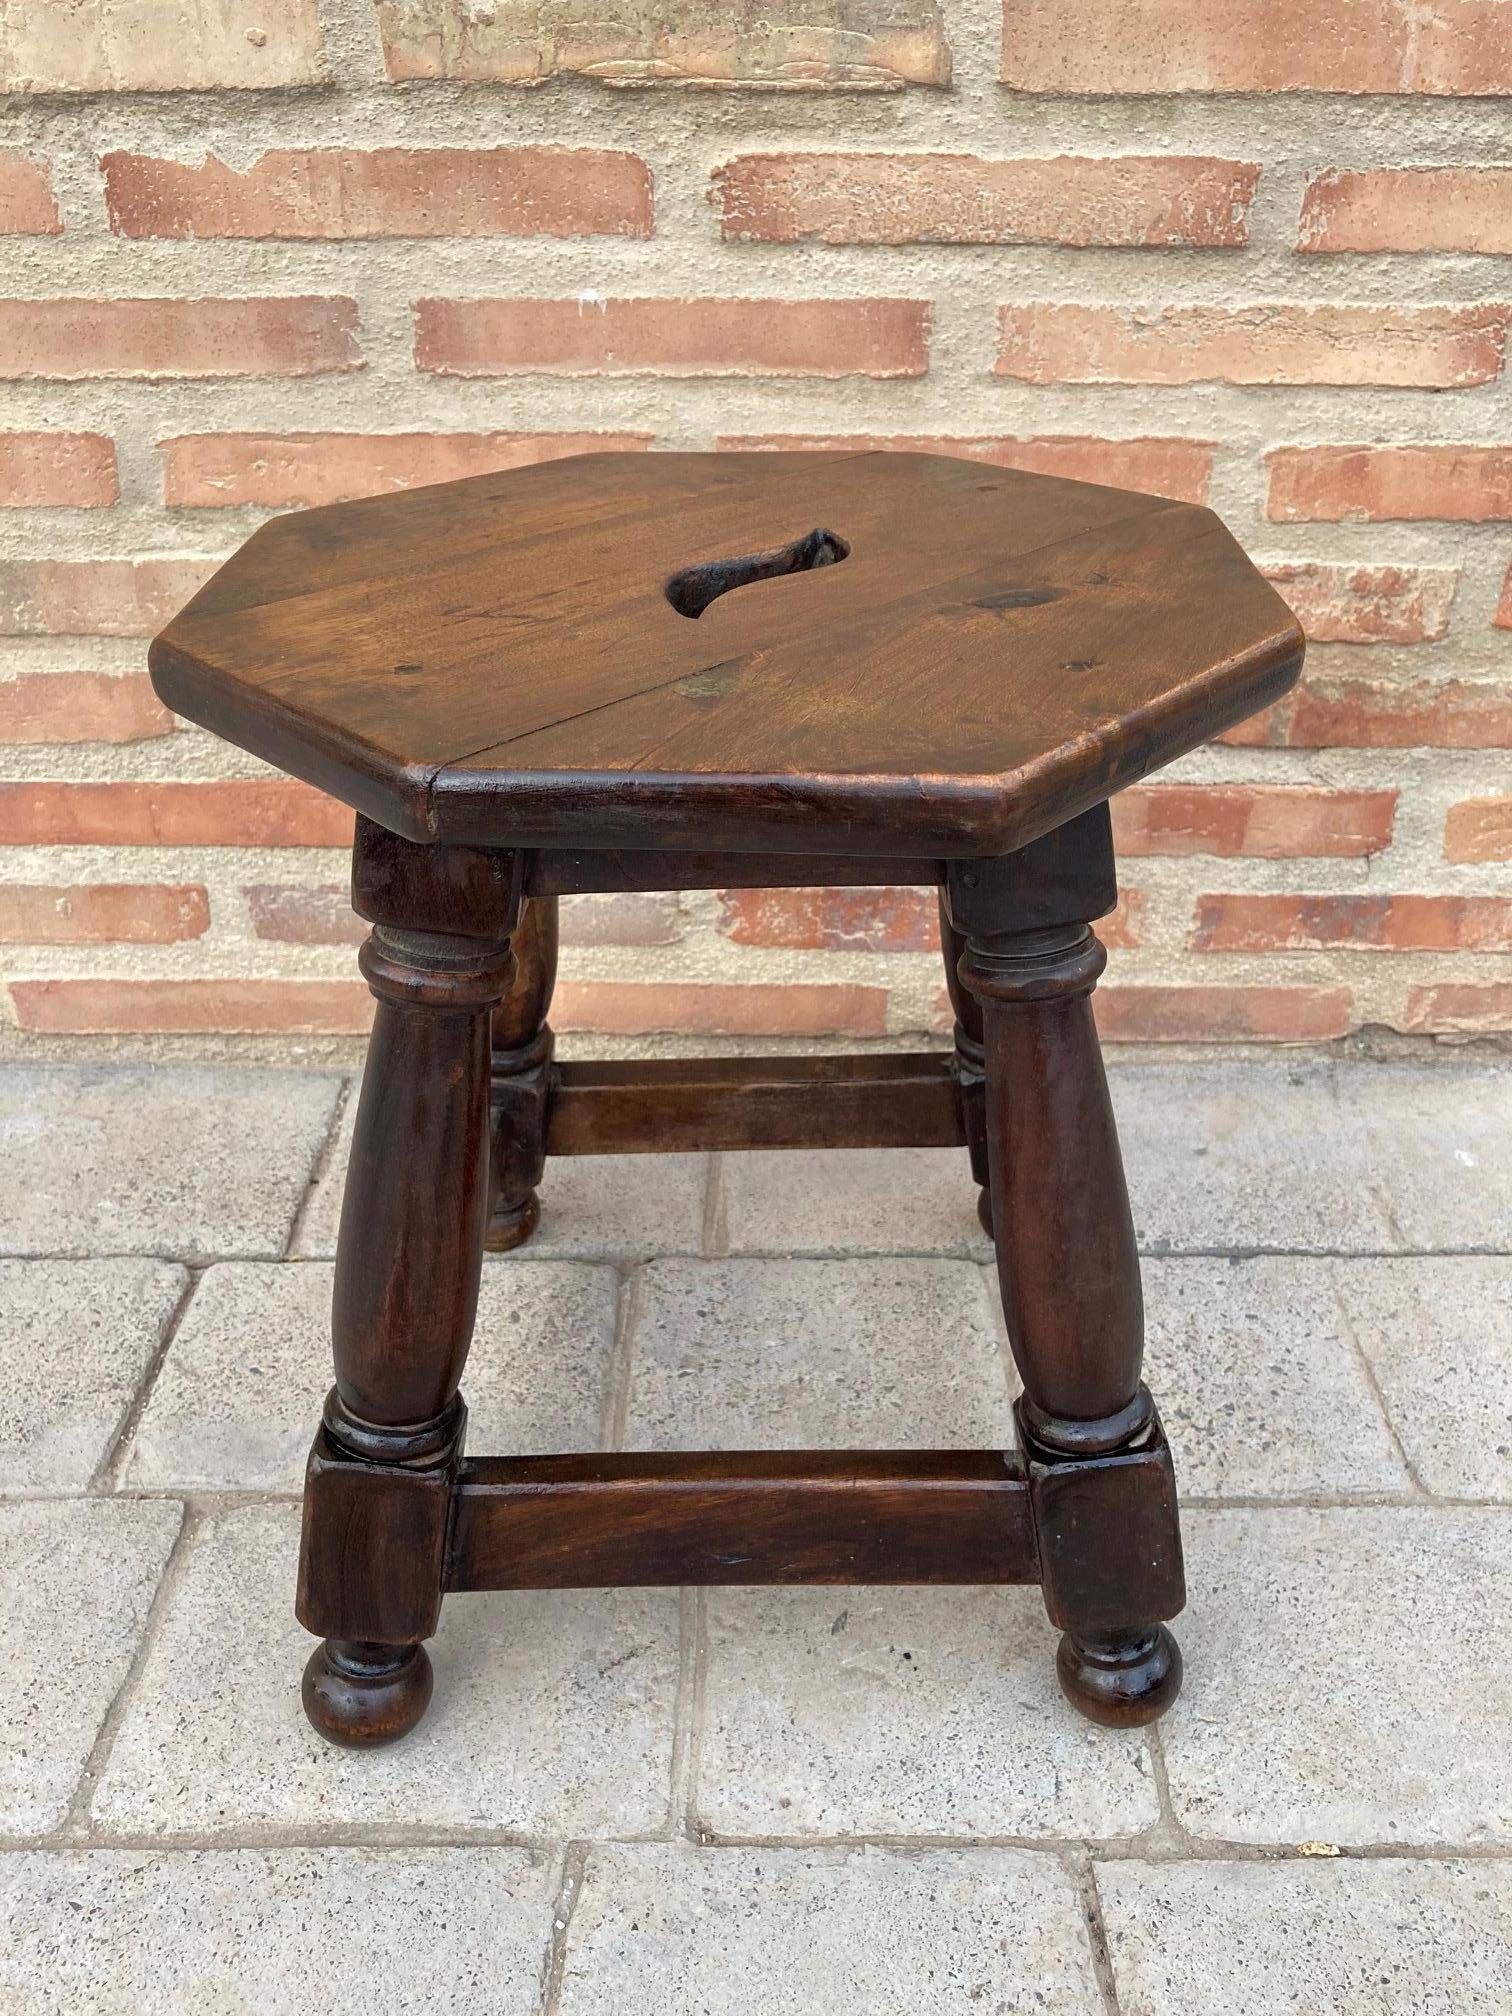 20th century Spanish rustic low stool or low table with octagonal top.